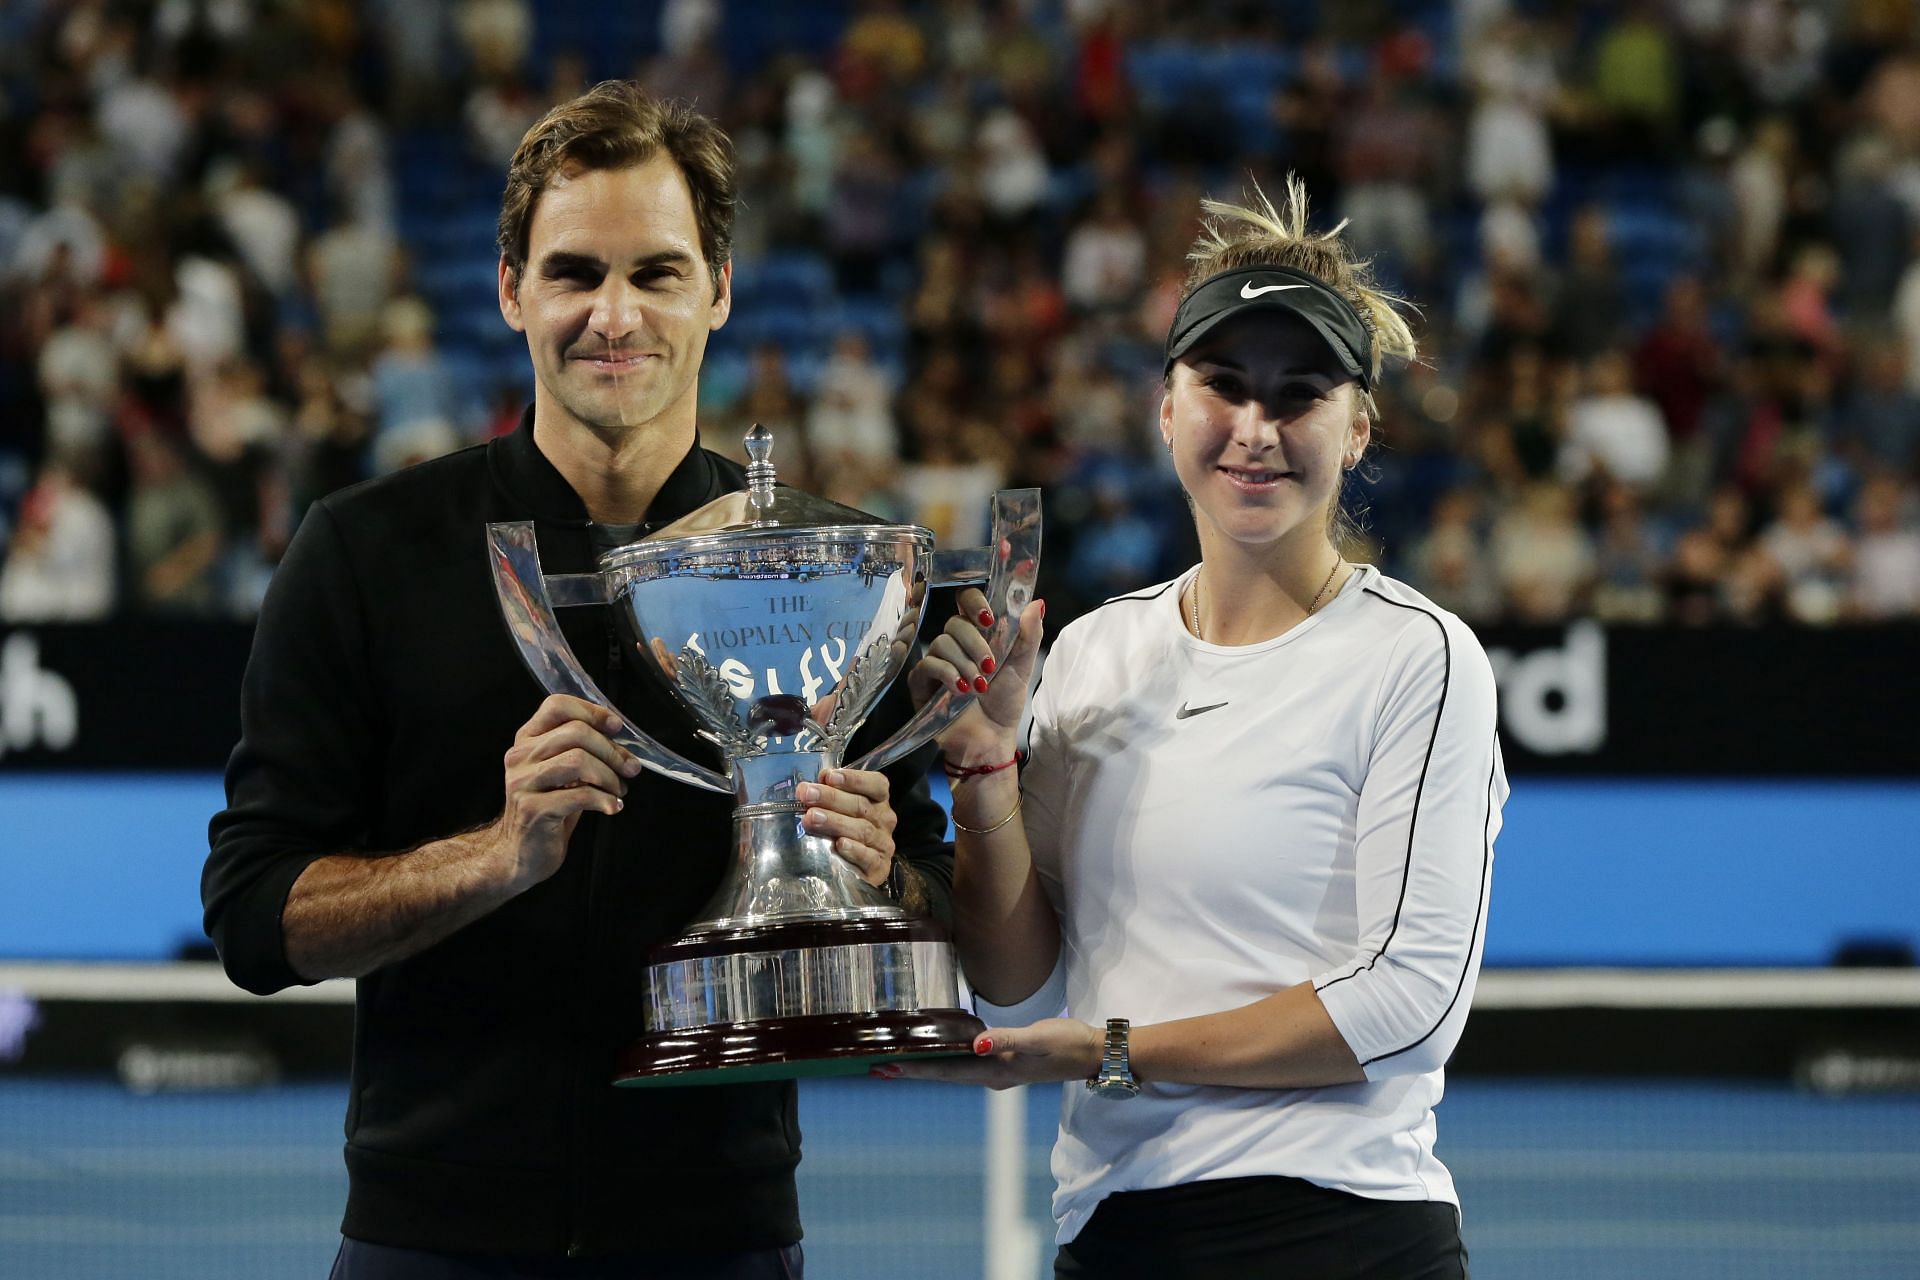 Roger and Belinda Bencic won the Hopman Cup in its last edition in 2019 before it was discontinued